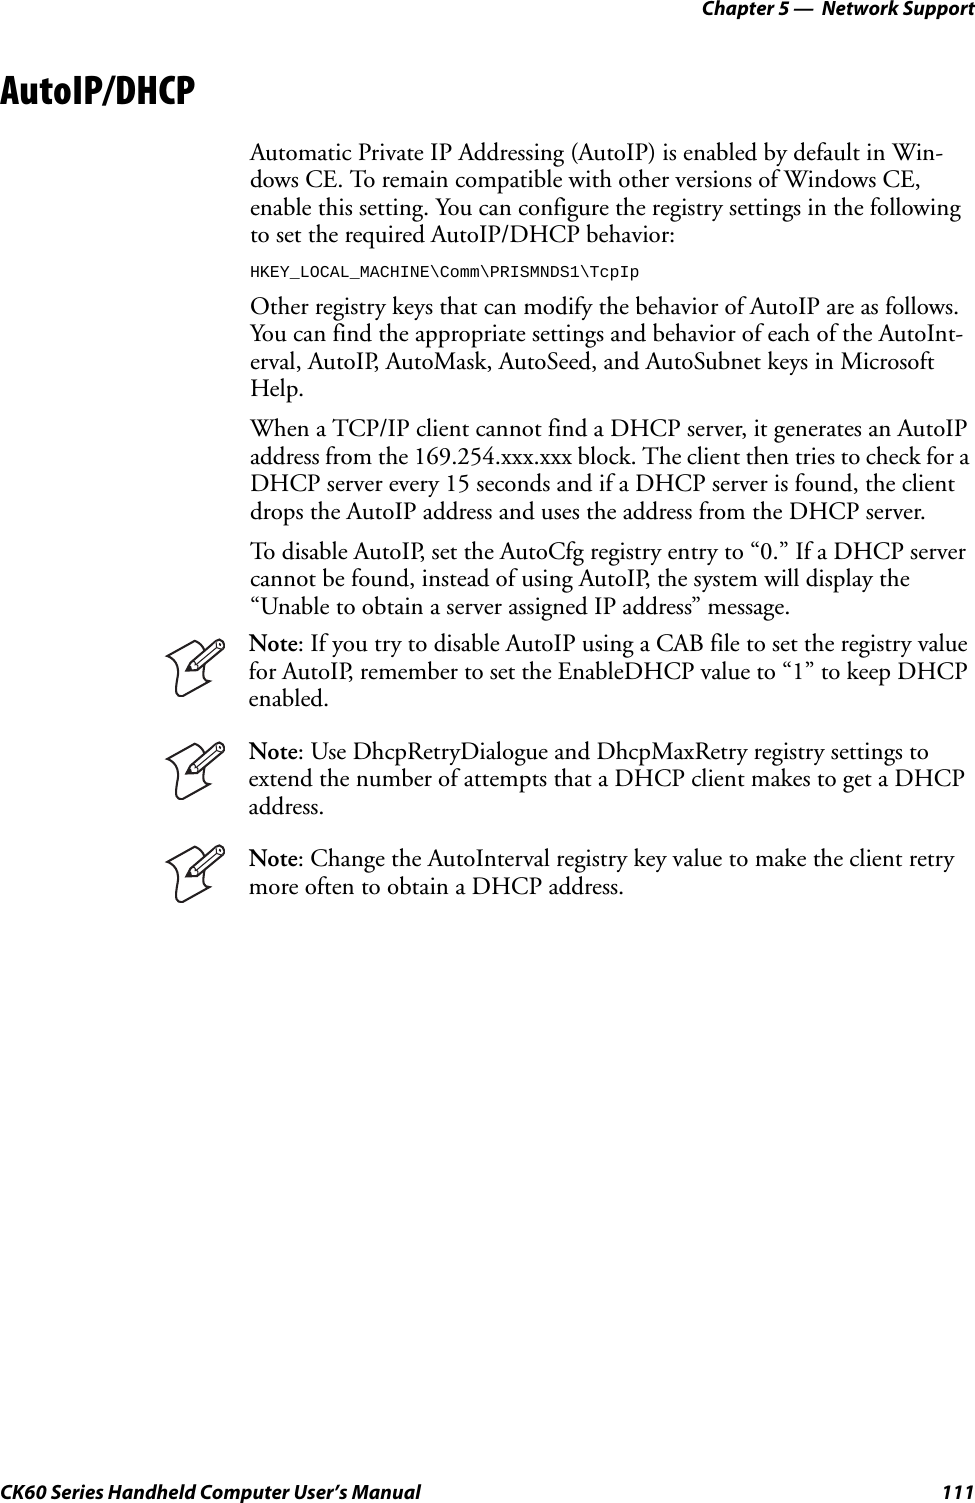 Chapter 5 —  Network SupportCK60 Series Handheld Computer User’s Manual 111AutoIP/DHCPAutomatic Private IP Addressing (AutoIP) is enabled by default in Win-dows CE. To remain compatible with other versions of Windows CE, enable this setting. You can configure the registry settings in the following to set the required AutoIP/DHCP behavior:HKEY_LOCAL_MACHINE\Comm\PRISMNDS1\TcpIpOther registry keys that can modify the behavior of AutoIP are as follows. You can find the appropriate settings and behavior of each of the AutoInt-erval, AutoIP, AutoMask, AutoSeed, and AutoSubnet keys in Microsoft Help.When a TCP/IP client cannot find a DHCP server, it generates an AutoIP address from the 169.254.xxx.xxx block. The client then tries to check for a DHCP server every 15 seconds and if a DHCP server is found, the client drops the AutoIP address and uses the address from the DHCP server.To disable AutoIP, set the AutoCfg registry entry to “0.” If a DHCP server cannot be found, instead of using AutoIP, the system will display the “Unable to obtain a server assigned IP address” message.Note: If you try to disable AutoIP using a CAB file to set the registry value for AutoIP, remember to set the EnableDHCP value to “1” to keep DHCP enabled.Note: Use DhcpRetryDialogue and DhcpMaxRetry registry settings to extend the number of attempts that a DHCP client makes to get a DHCP address.Note: Change the AutoInterval registry key value to make the client retry more often to obtain a DHCP address.